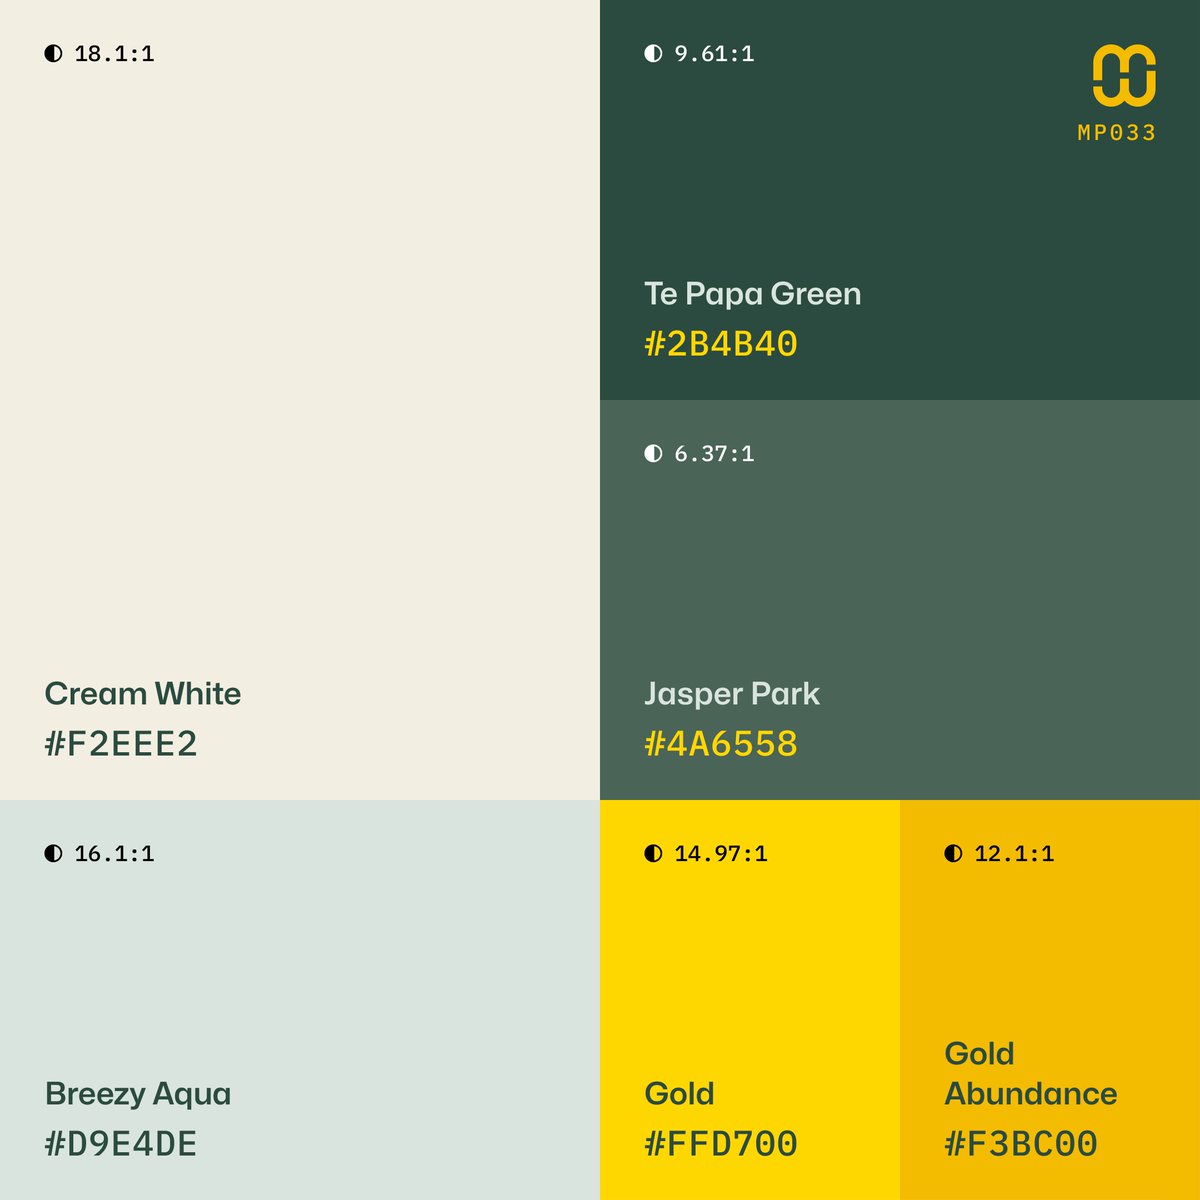 From the archives: #MindfulPalettes color palette no. 33 reworked into the new grid layout.

Free to use for #UI and #Branding.